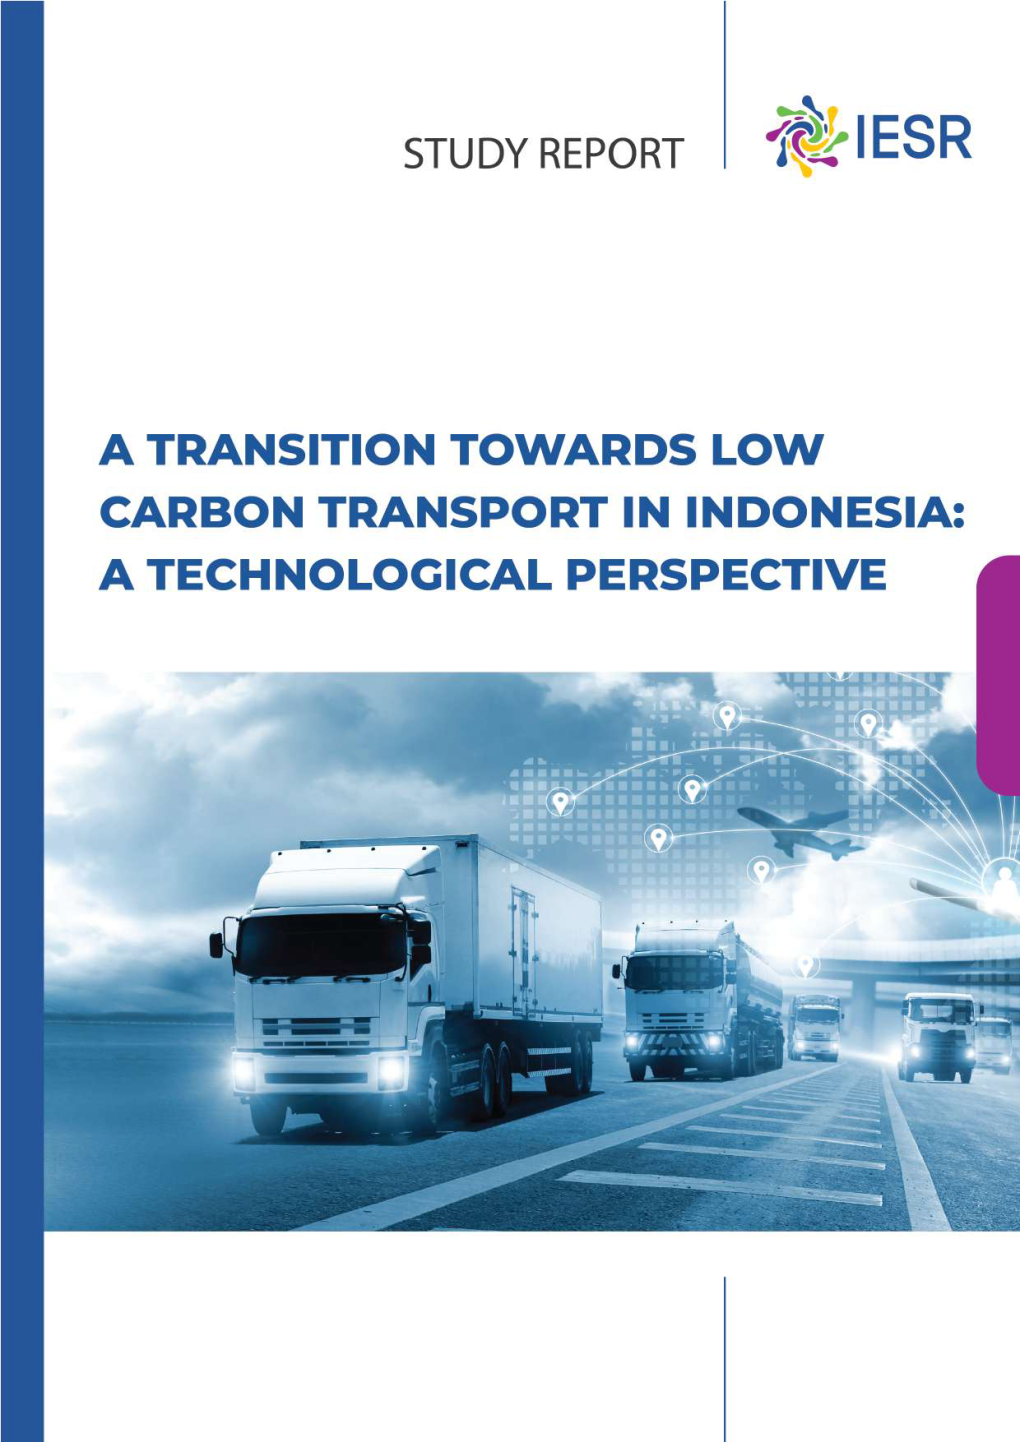 A Transition Towards Low Carbon Transportation a Transition Towards Low Carbon Transport 2 in Indonesia: a Technological Perspective